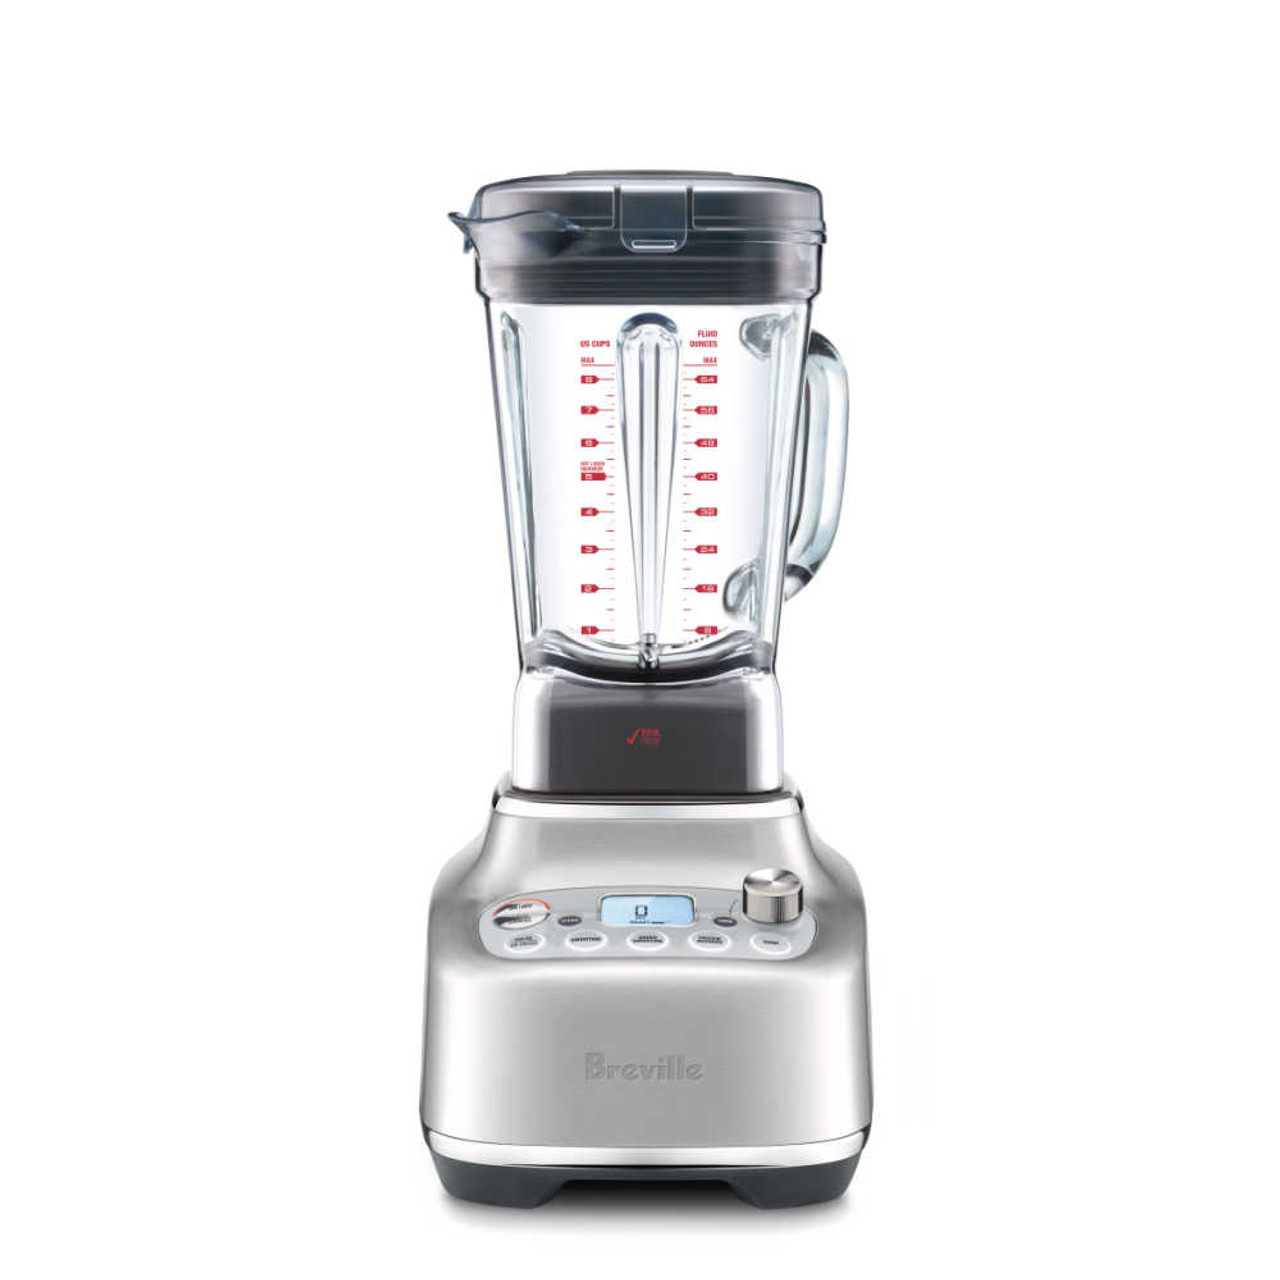 https://cdn11.bigcommerce.com/s-hccytny0od/images/stencil/1280x1280/products/2577/25134/Breville_Super_Q_Blender_in_Brushed_Stainless_Steel__04319.1695847509.jpg?c=2?imbypass=on